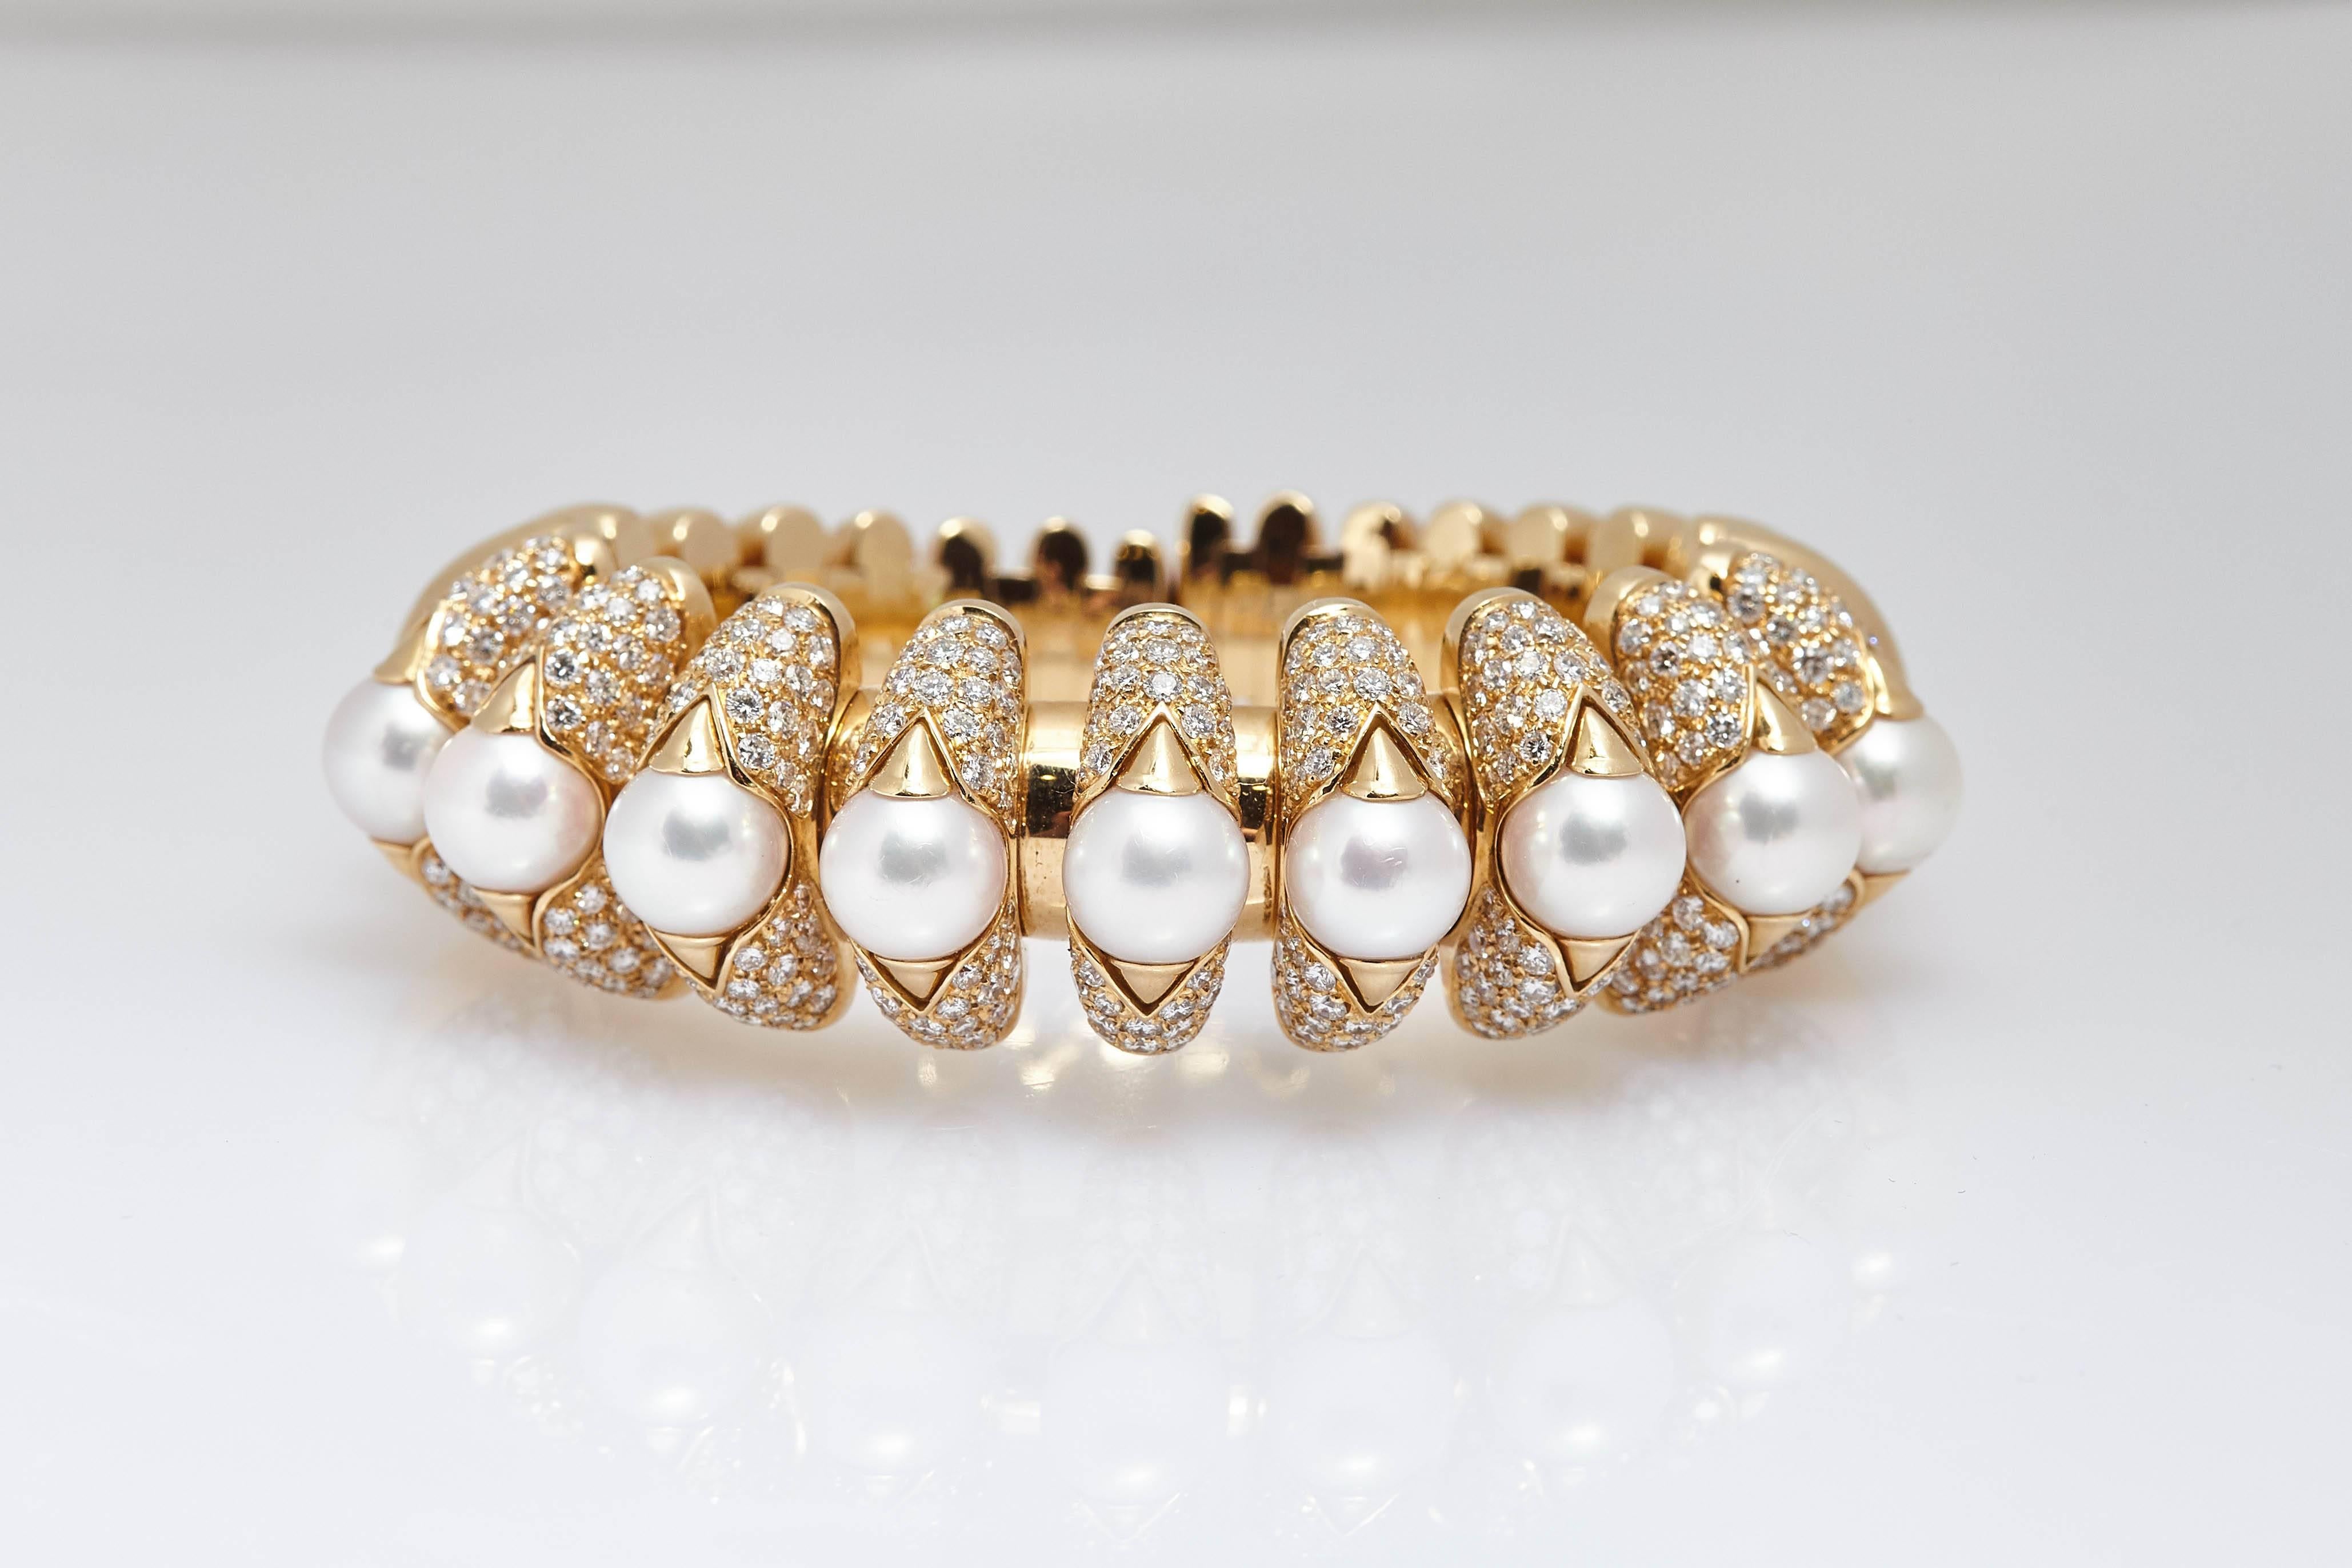 A chunky 18kt yellow gold bracelet by Bulgari with pearls and diamonds. Made in Italy, circa 1980s.